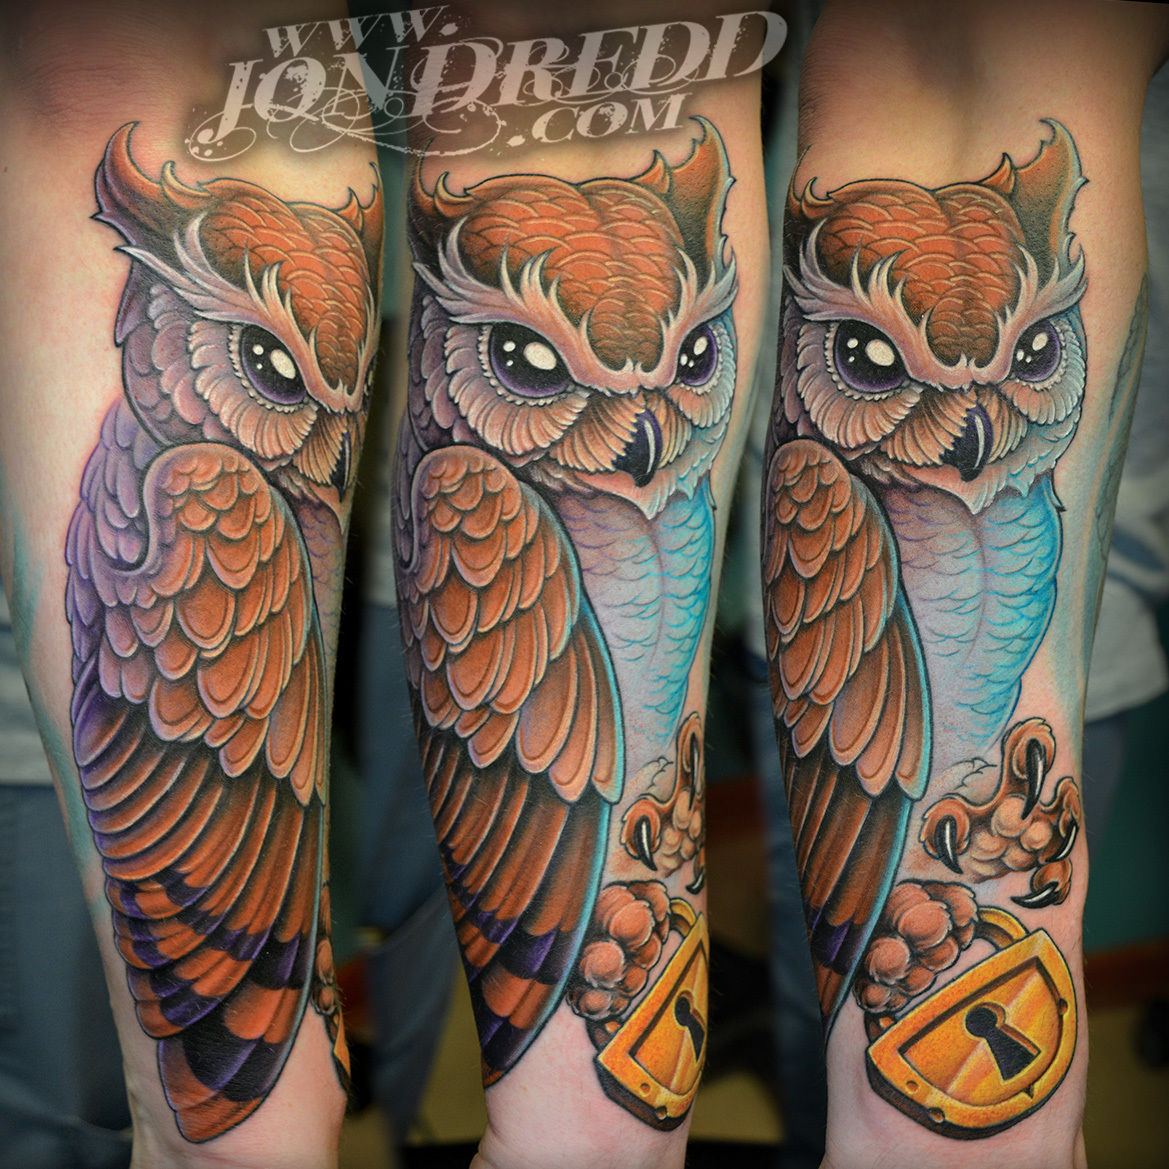 For lovers of owl tattoos